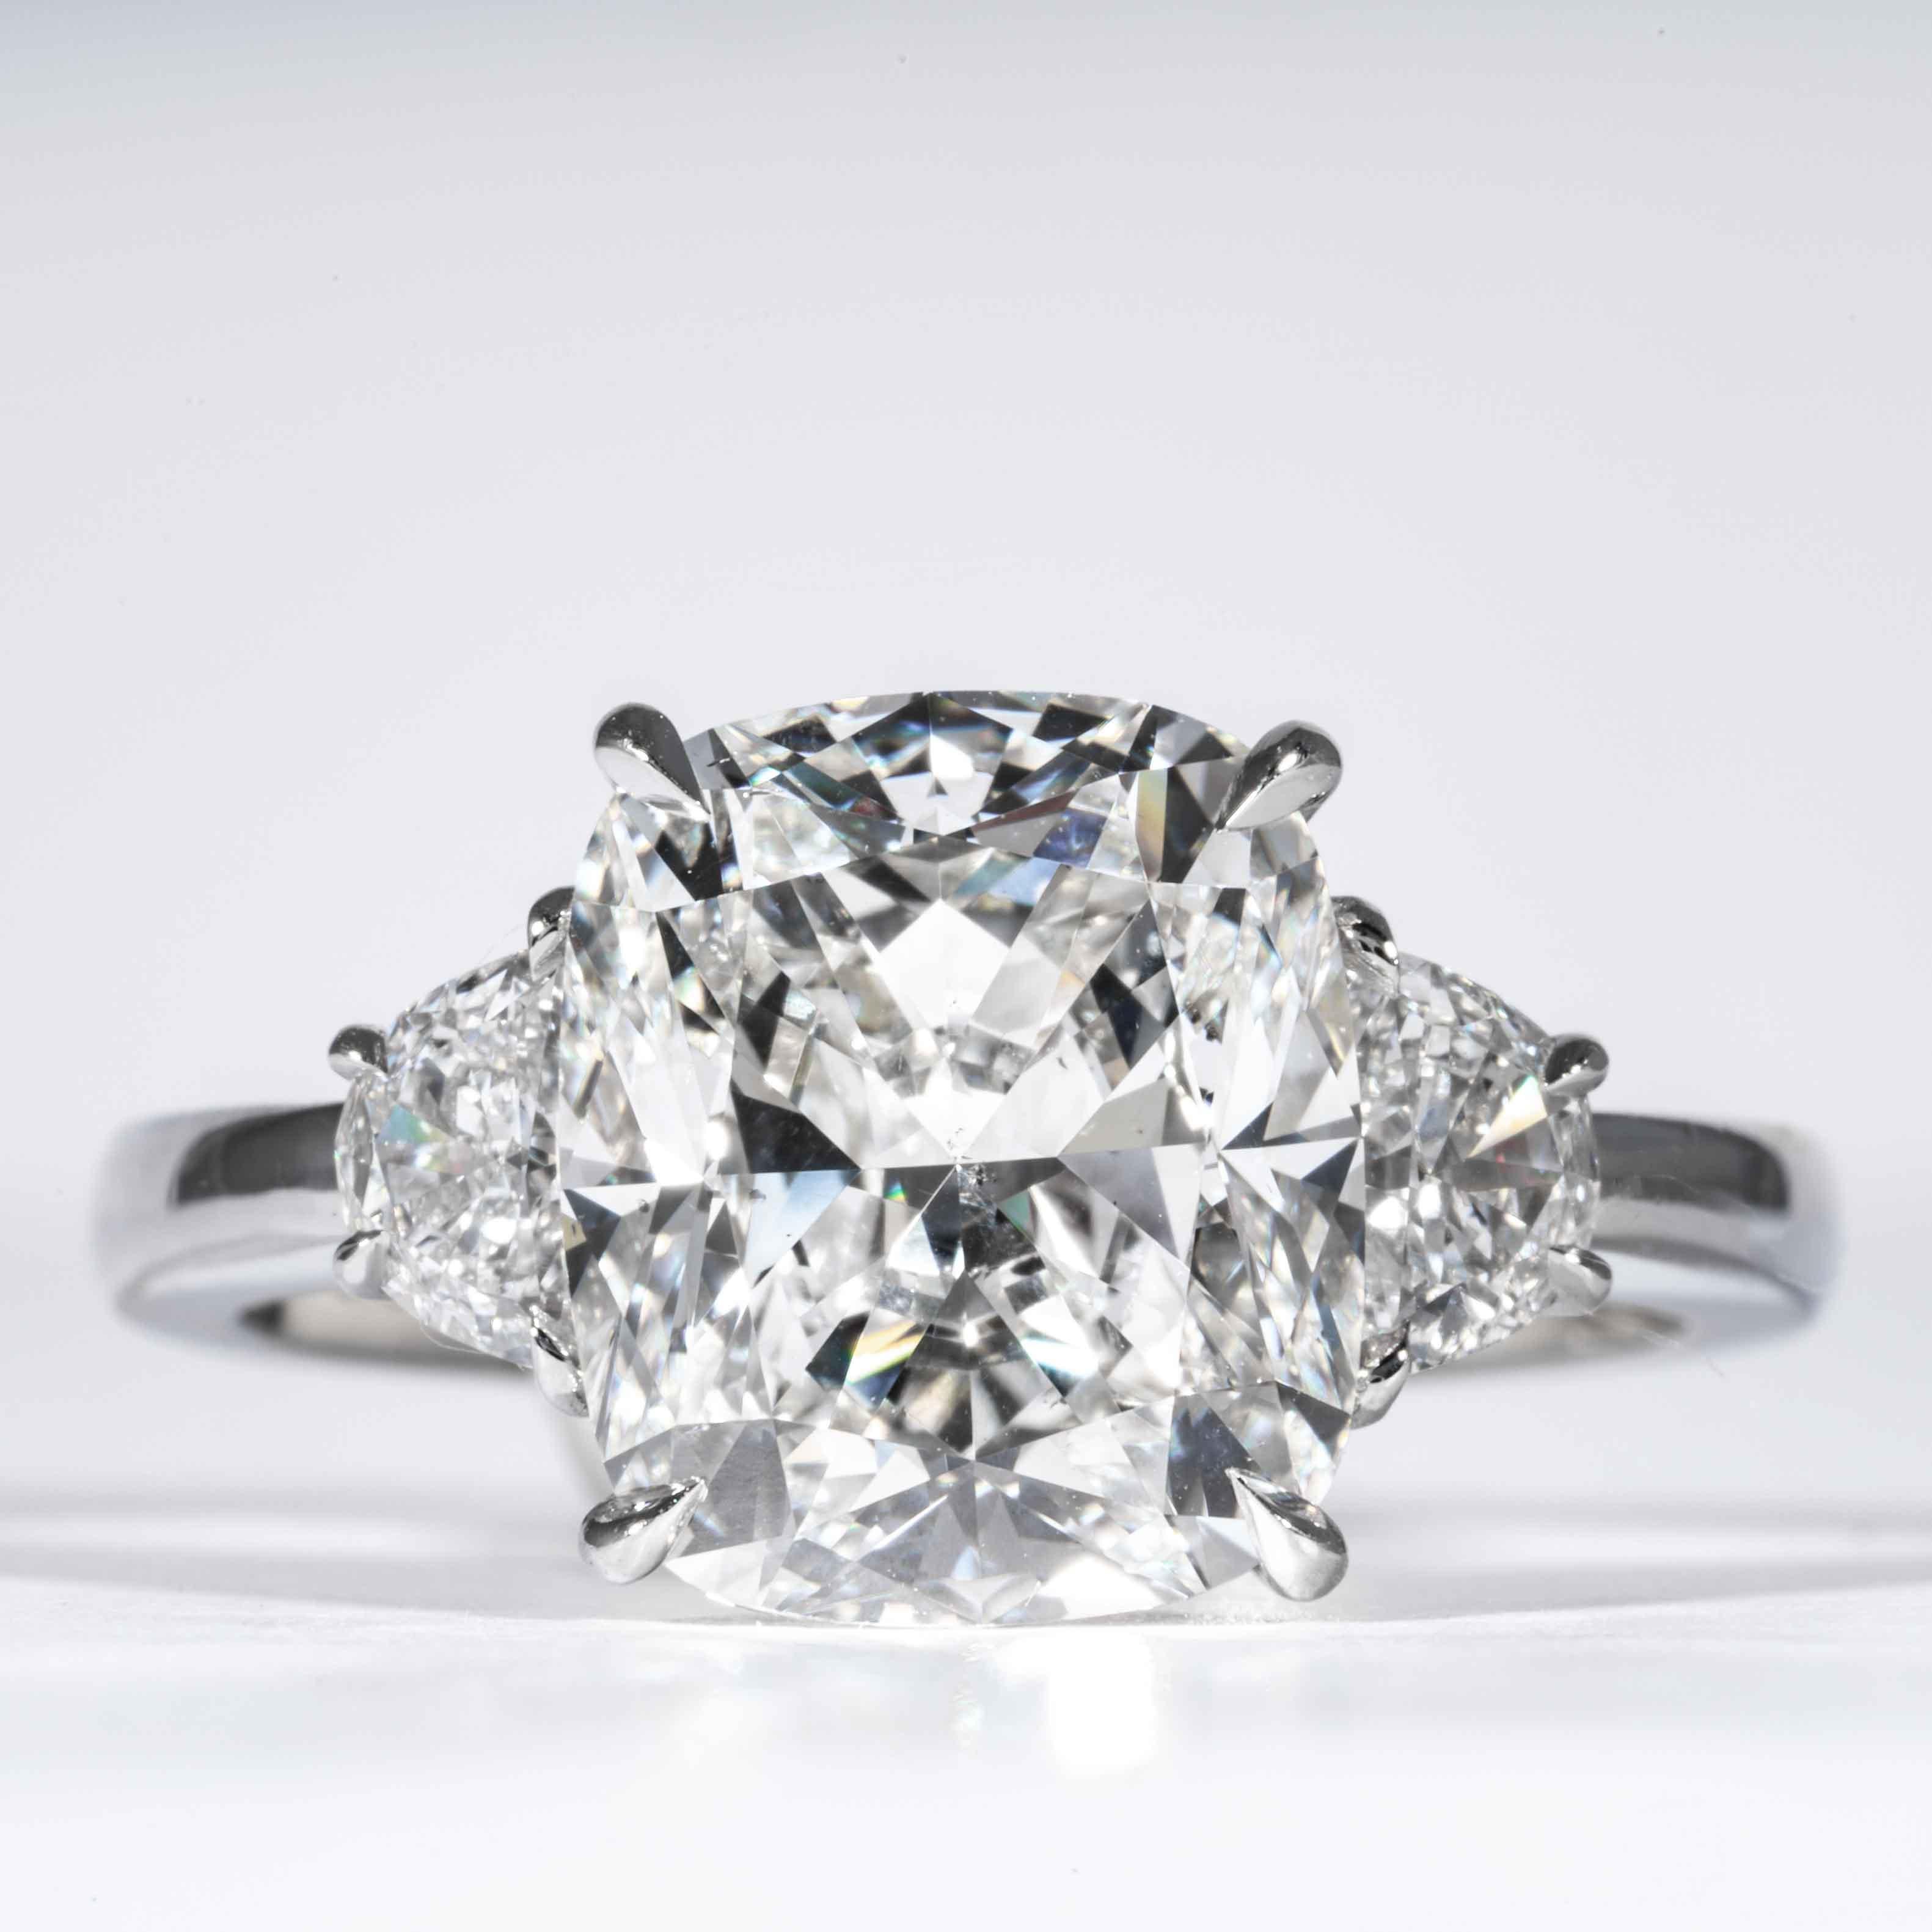 This 3-Stone diamond ring is offered by Shreve, Crump & Low. This 4.10 carat GIA Certified E SI1 cushion cut diamond measuring 10.56 x 9.00 x 5.68 mm is custom set in a handcrafted Shreve, Crump & Low platinum 3-stone ring. The 4.10 carat center